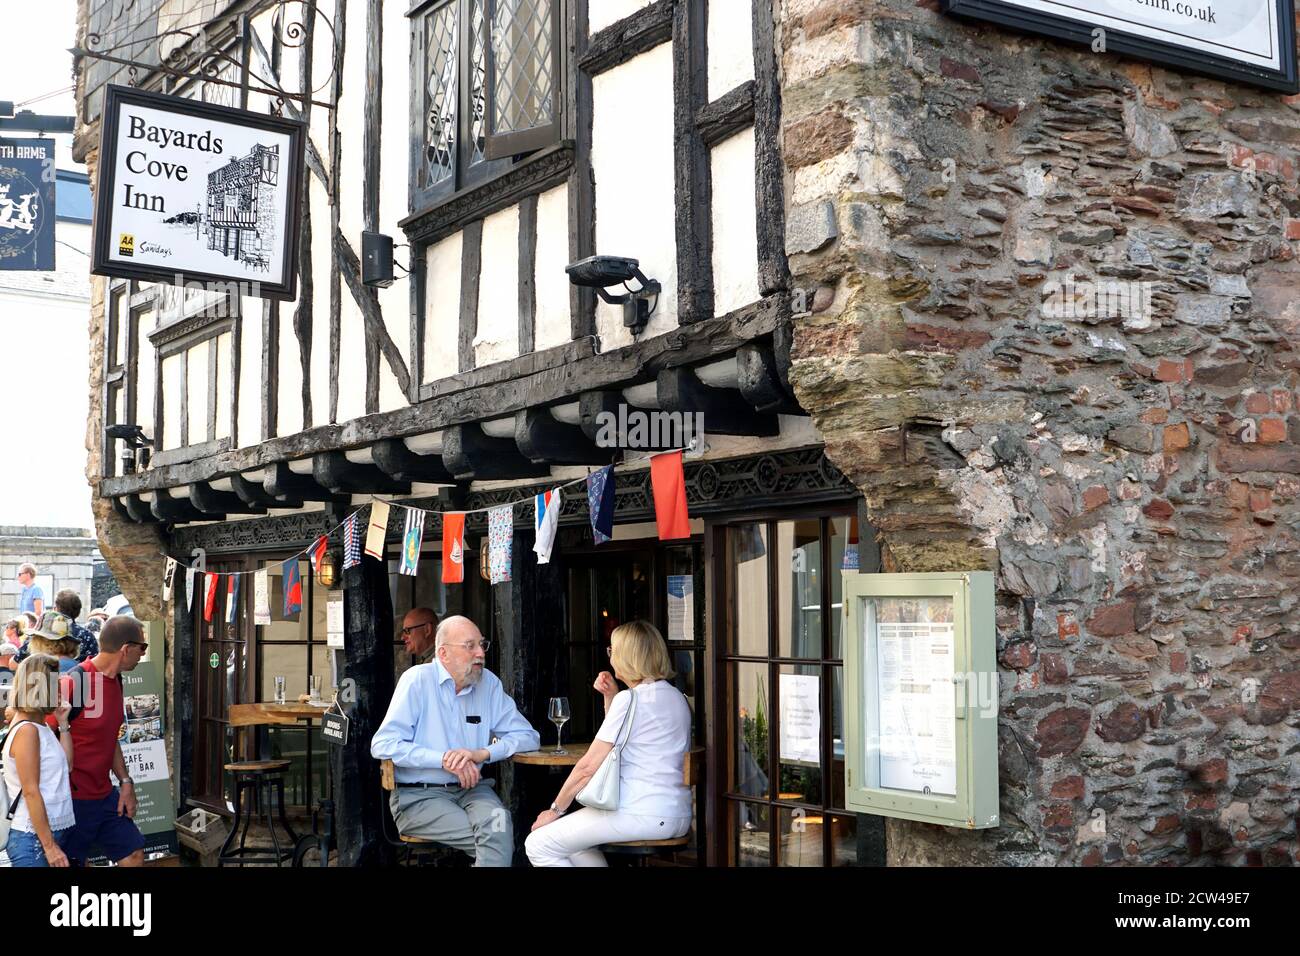 Dartmouth, Devon, UK. September 16, 2020. Tourist enjoying food and drink at one of the oldest buildings in Dartmouth, Bayards Cove is a 14th-century Stock Photo